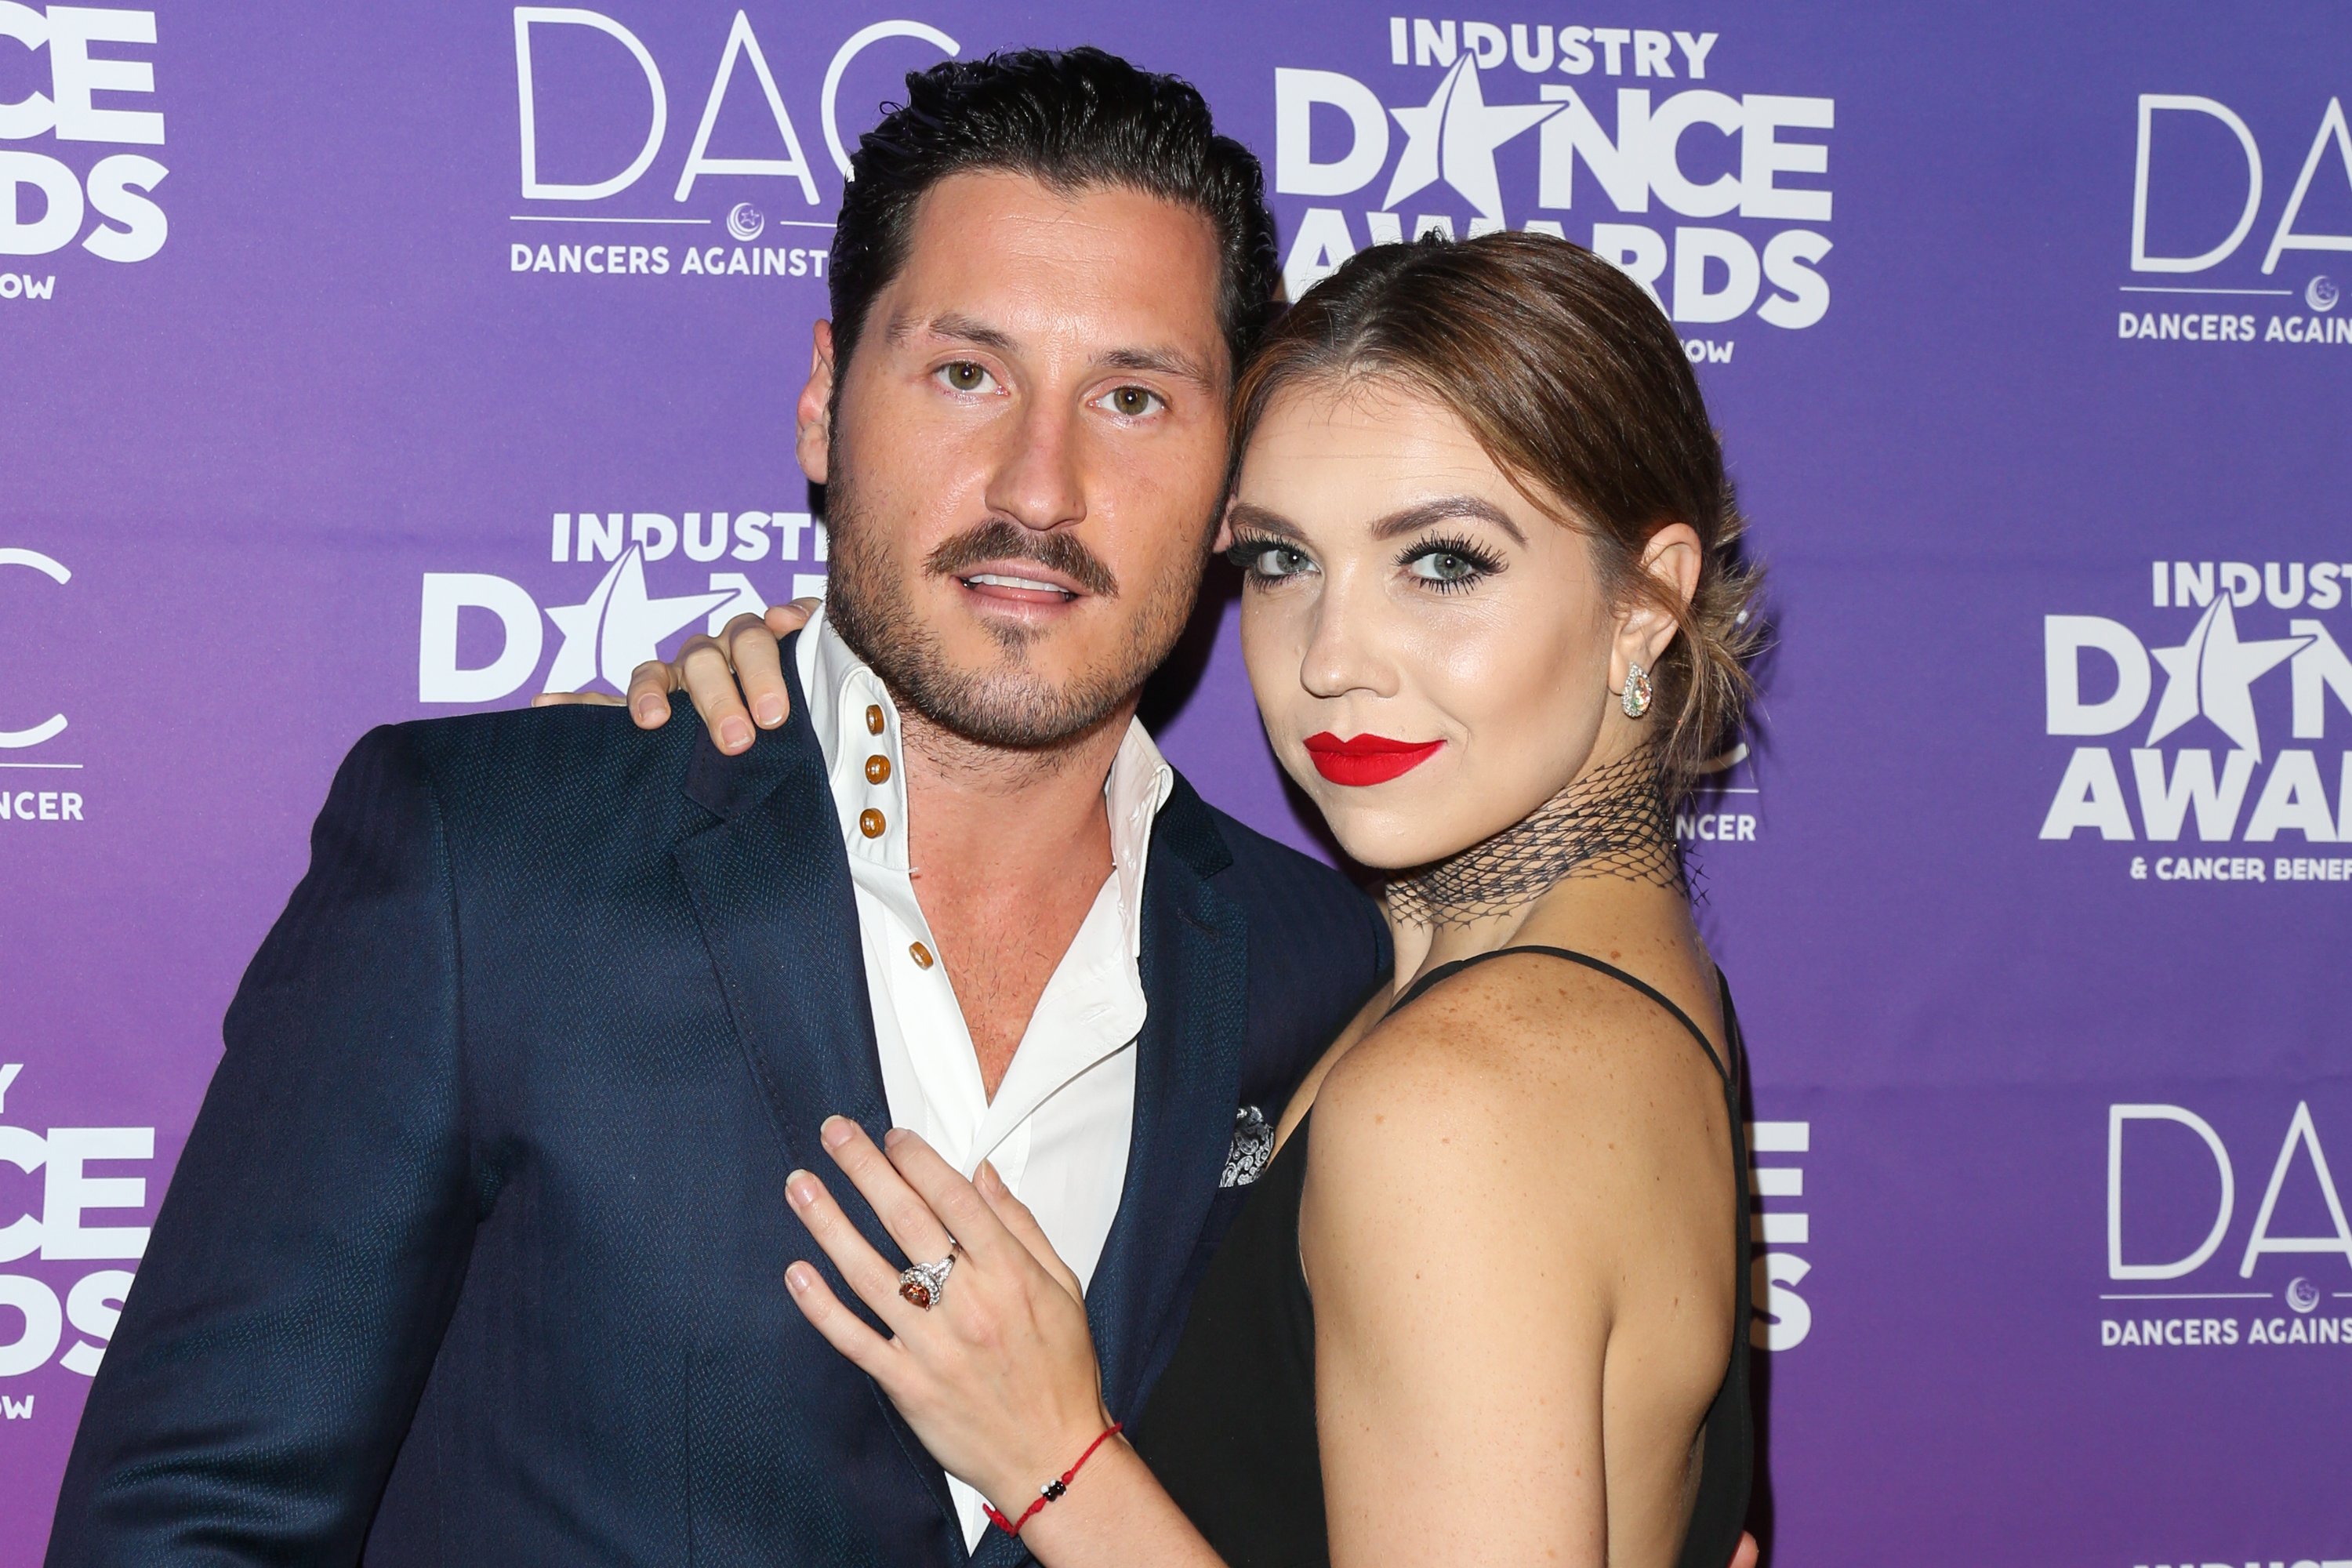 Val Chmerkovskiy and his wife, Jenna Johnson attending the 2017 Industry Dance Awards in Hollywood, on August 16, 2017. | Photo: Getty Images.  